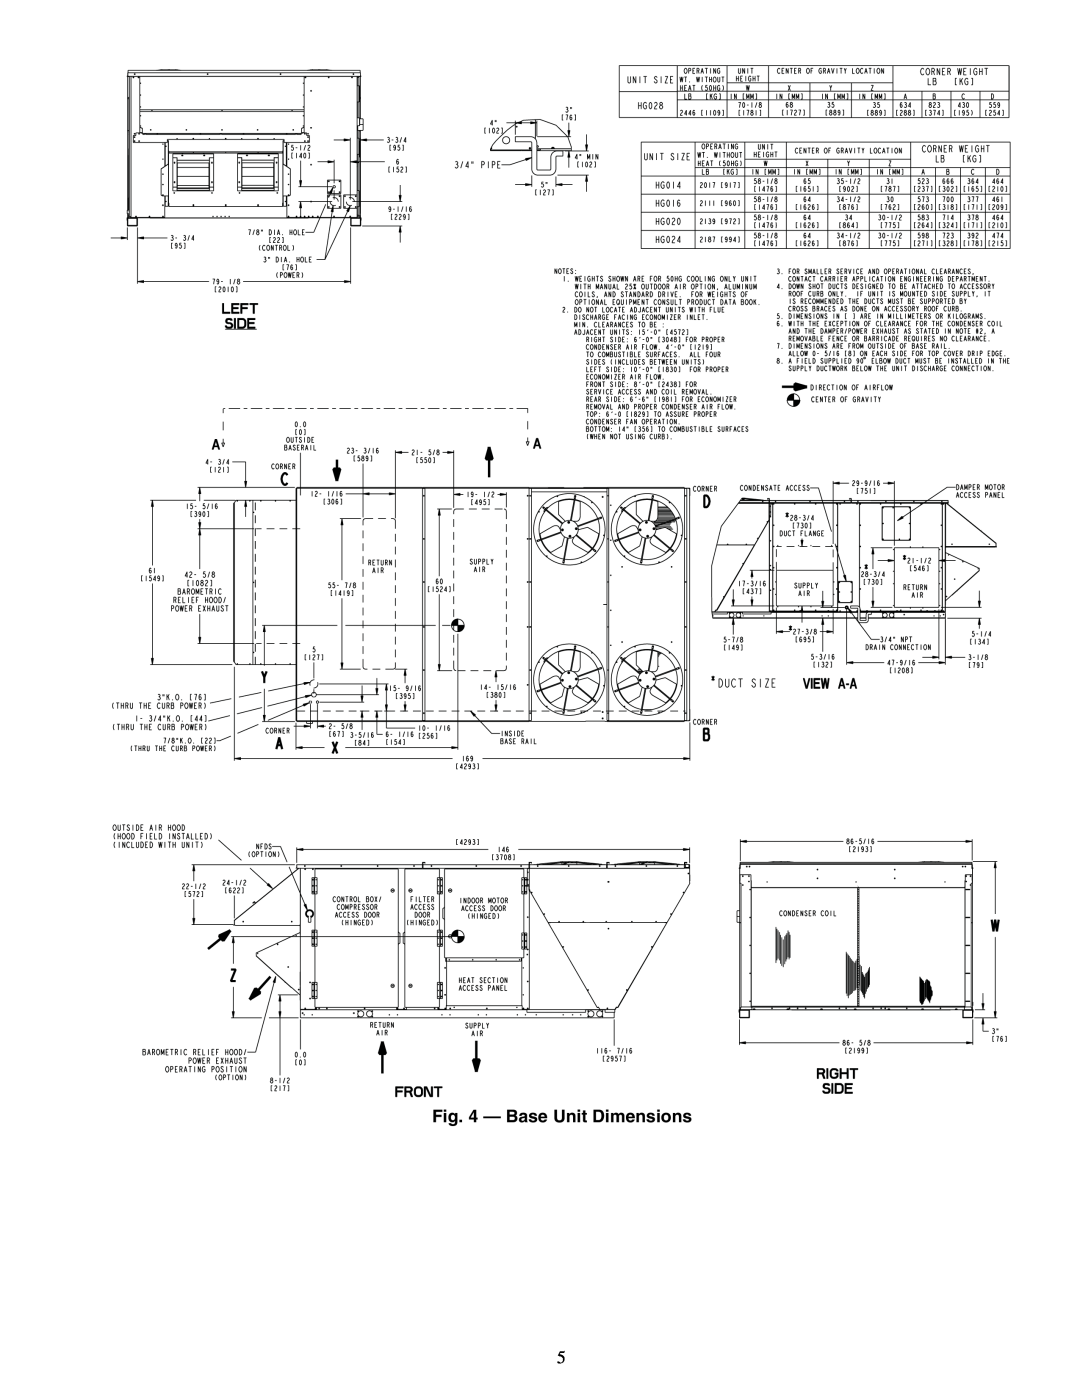 Carrier 50HG014-028 installation instructions Base Unit Dimensions 